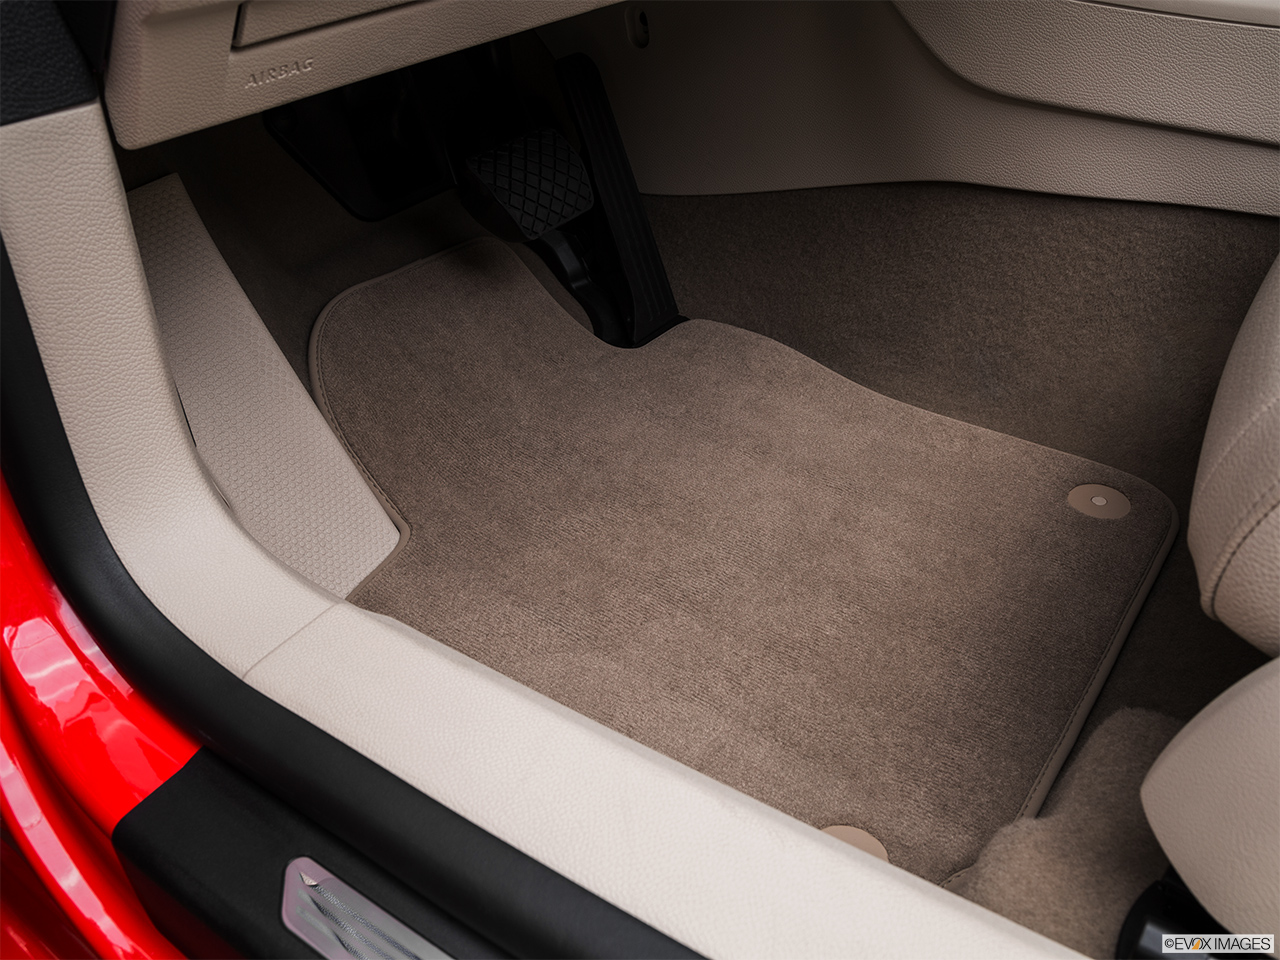 2016 Volkswagen Eos Komfort Edition Driver's floor mat and pedals. Mid-seat level from outside looking in. 